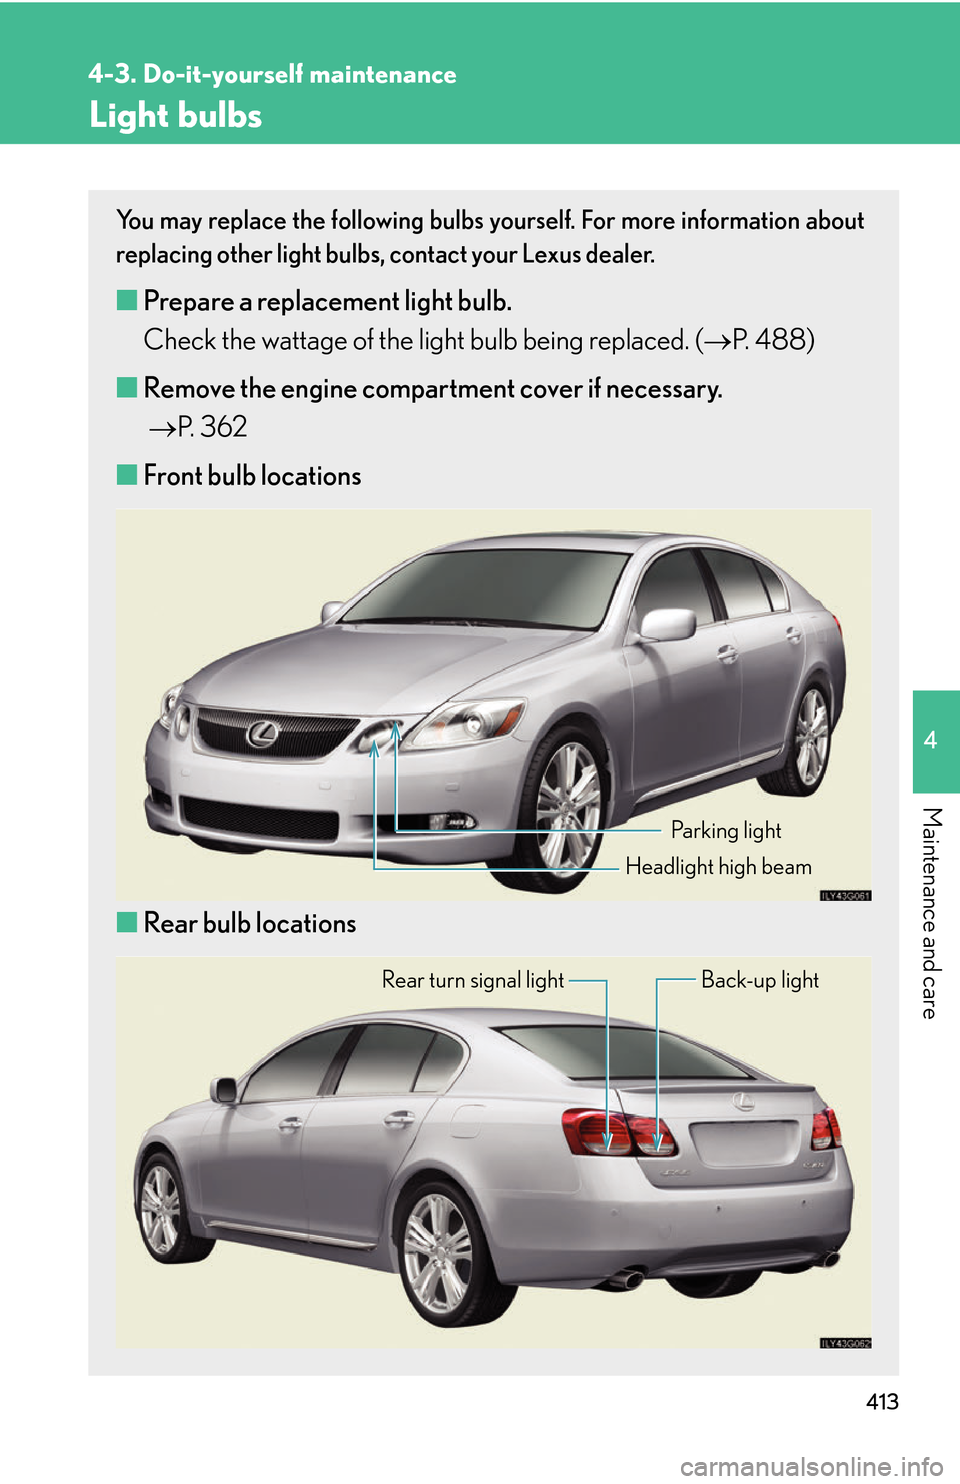 Lexus GS450h 2007  Specifications / LEXUS 2007 GS450H THROUGH JUNE 2006 PROD. OWNERS MANUAL (OM30727U) 413
4-3. Do-it-yourself maintenance
4
Maintenance and care
Light bulbs
You may replace the following bulbs yourself. For more information about 
replacing other light bulbs, contact your Lexus dealer.